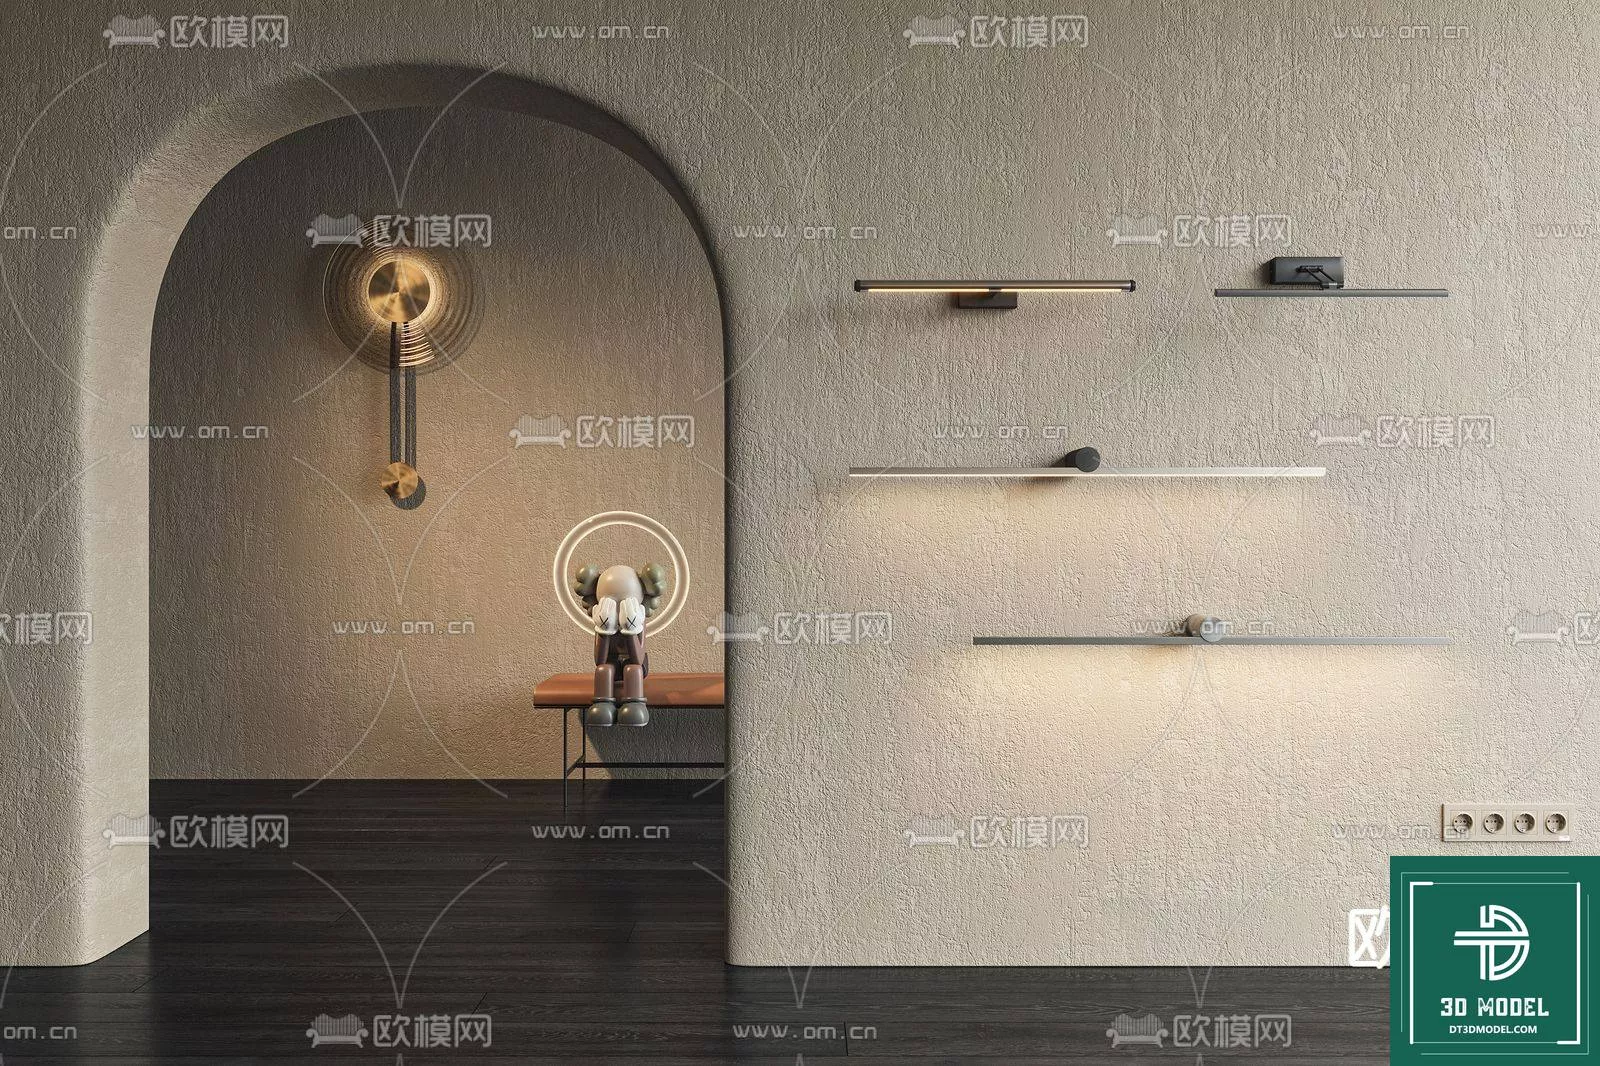 MODERN WALL LAMP - SKETCHUP 3D MODEL - VRAY OR ENSCAPE - ID16082